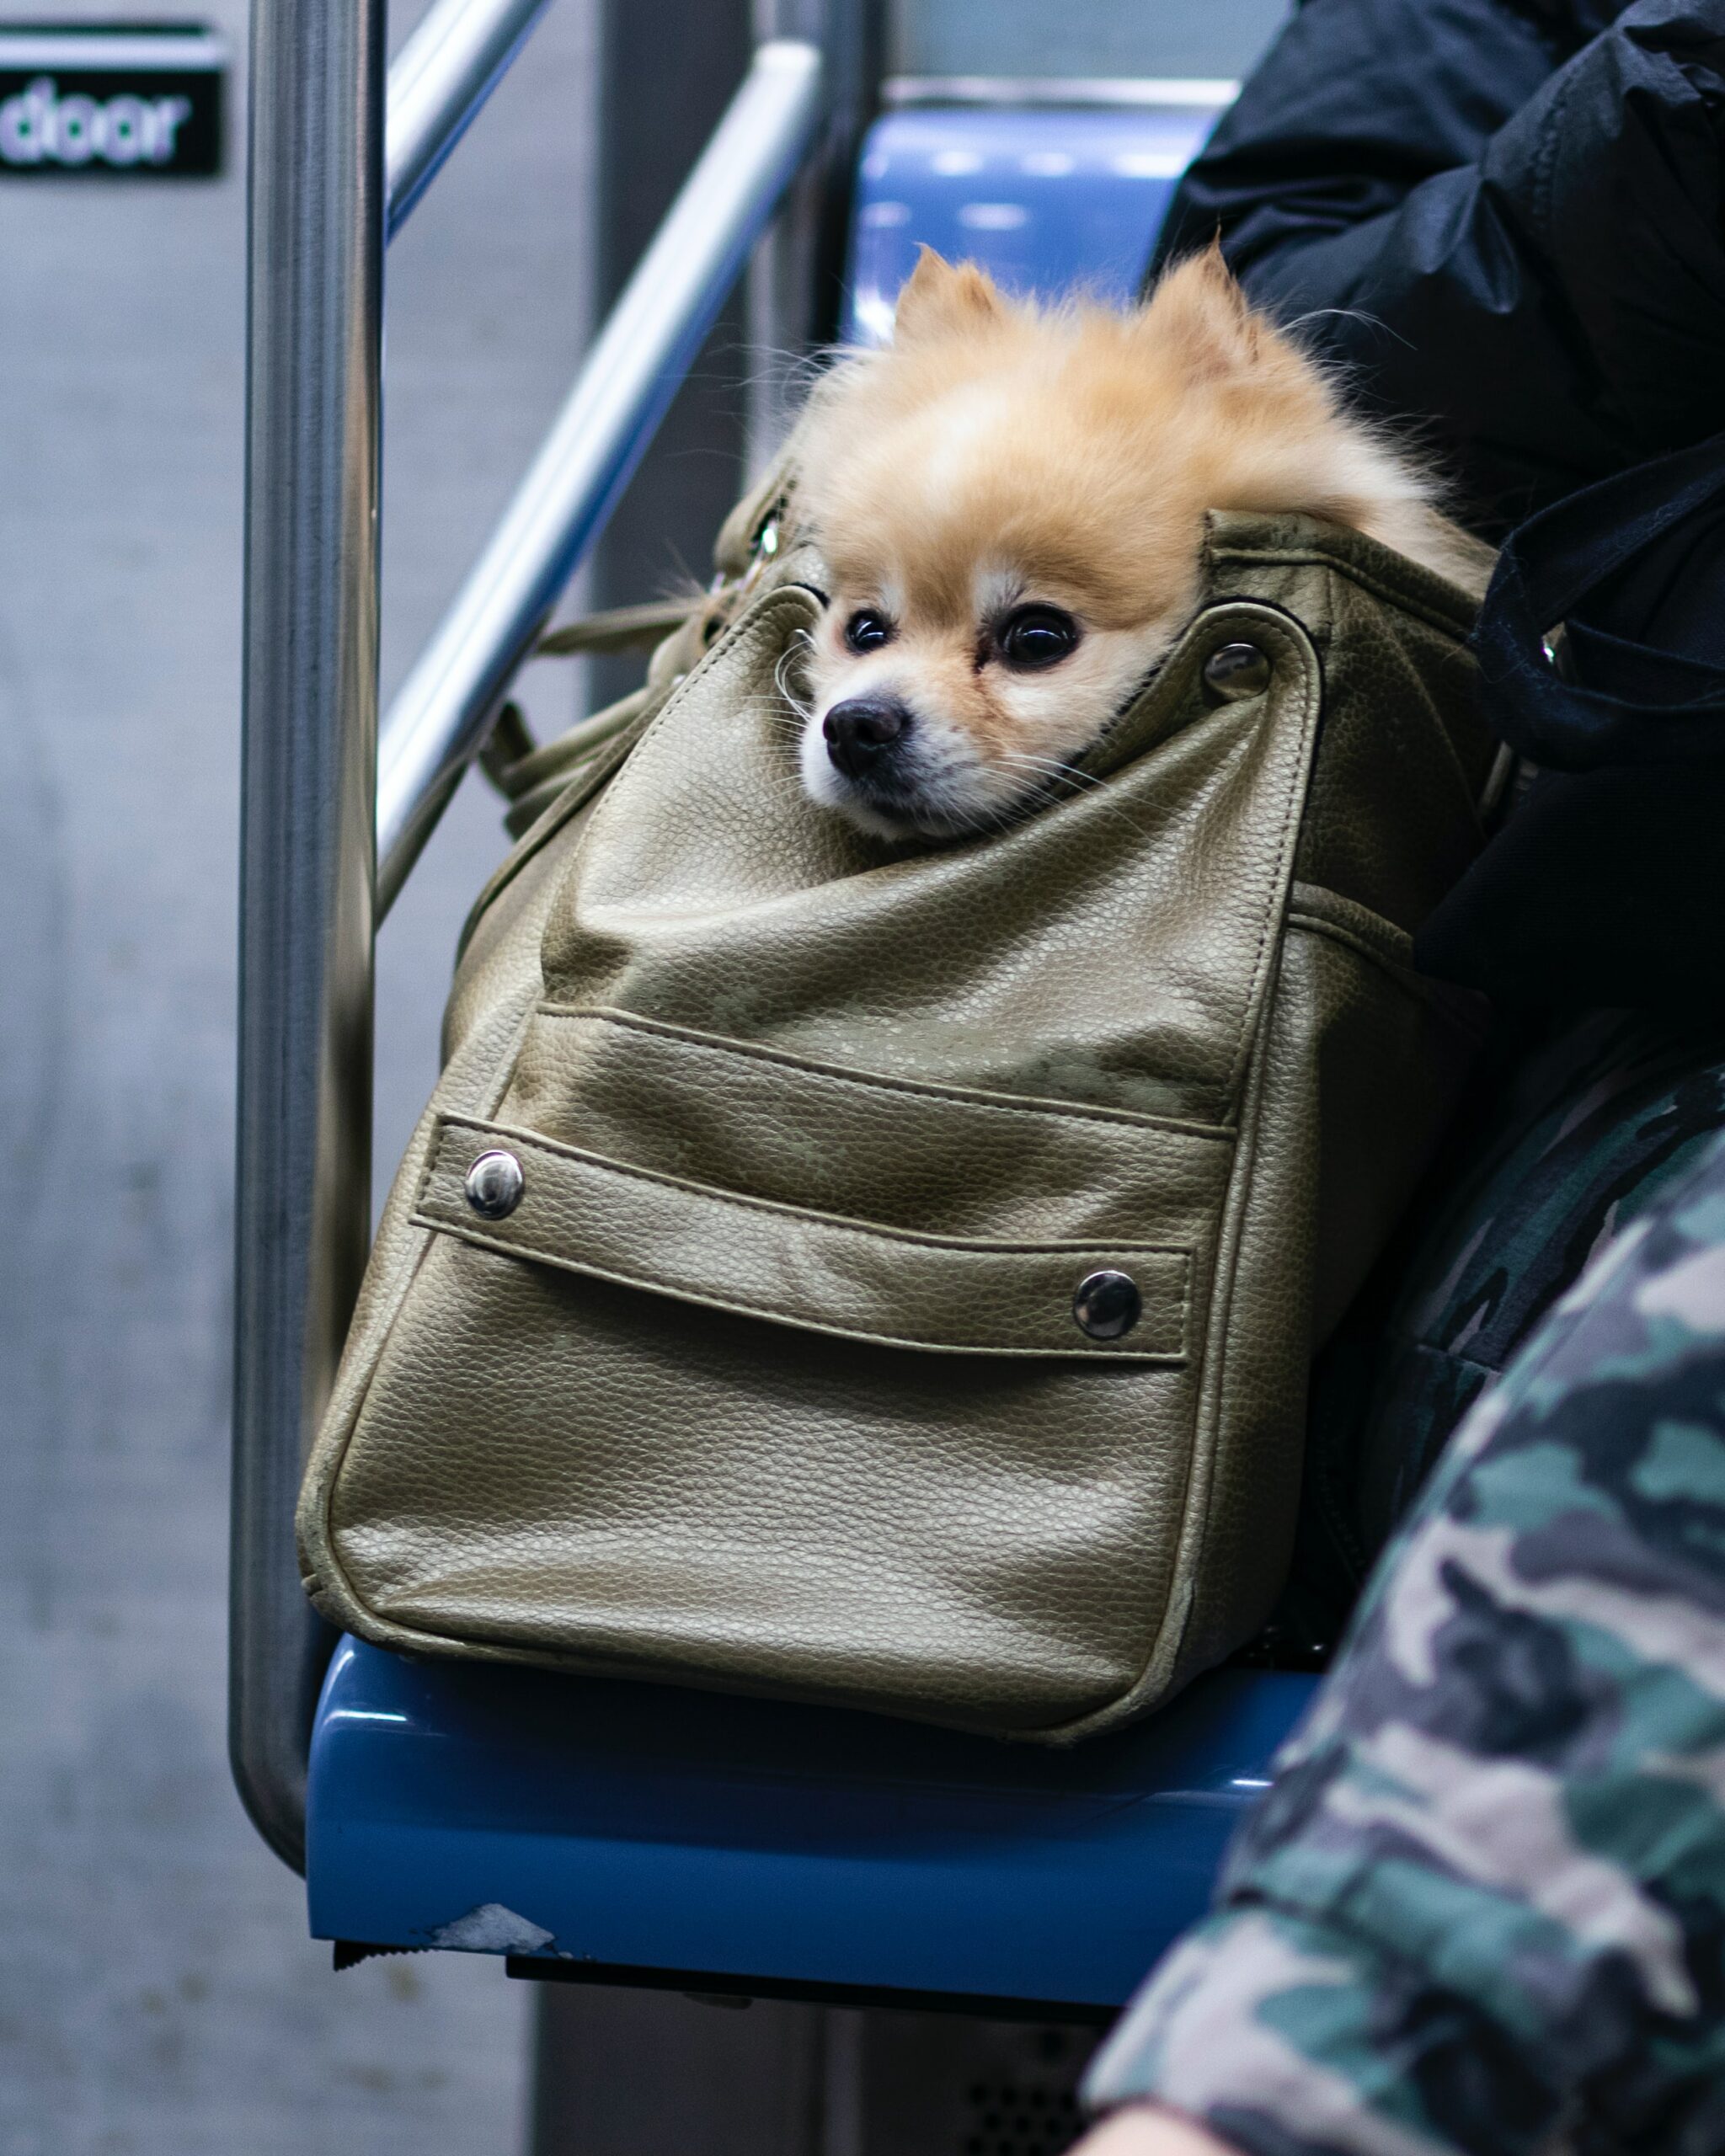 Taking Your Pooch on the Train